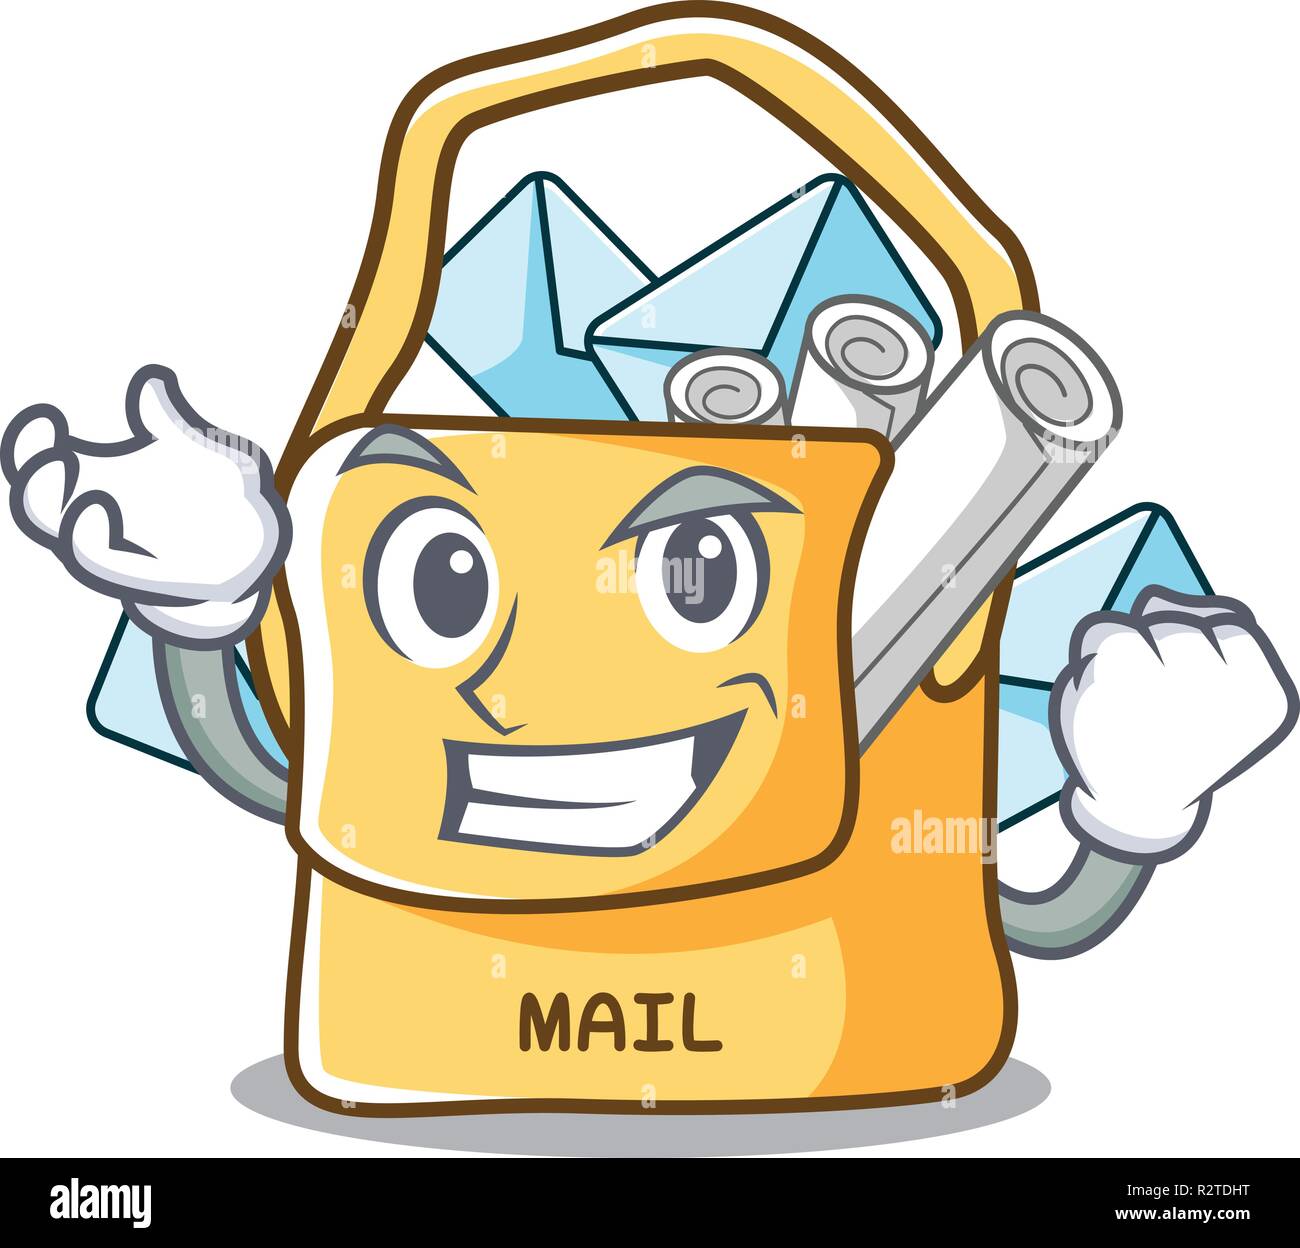 Successful the bag with shape mail cartoon Stock Vector